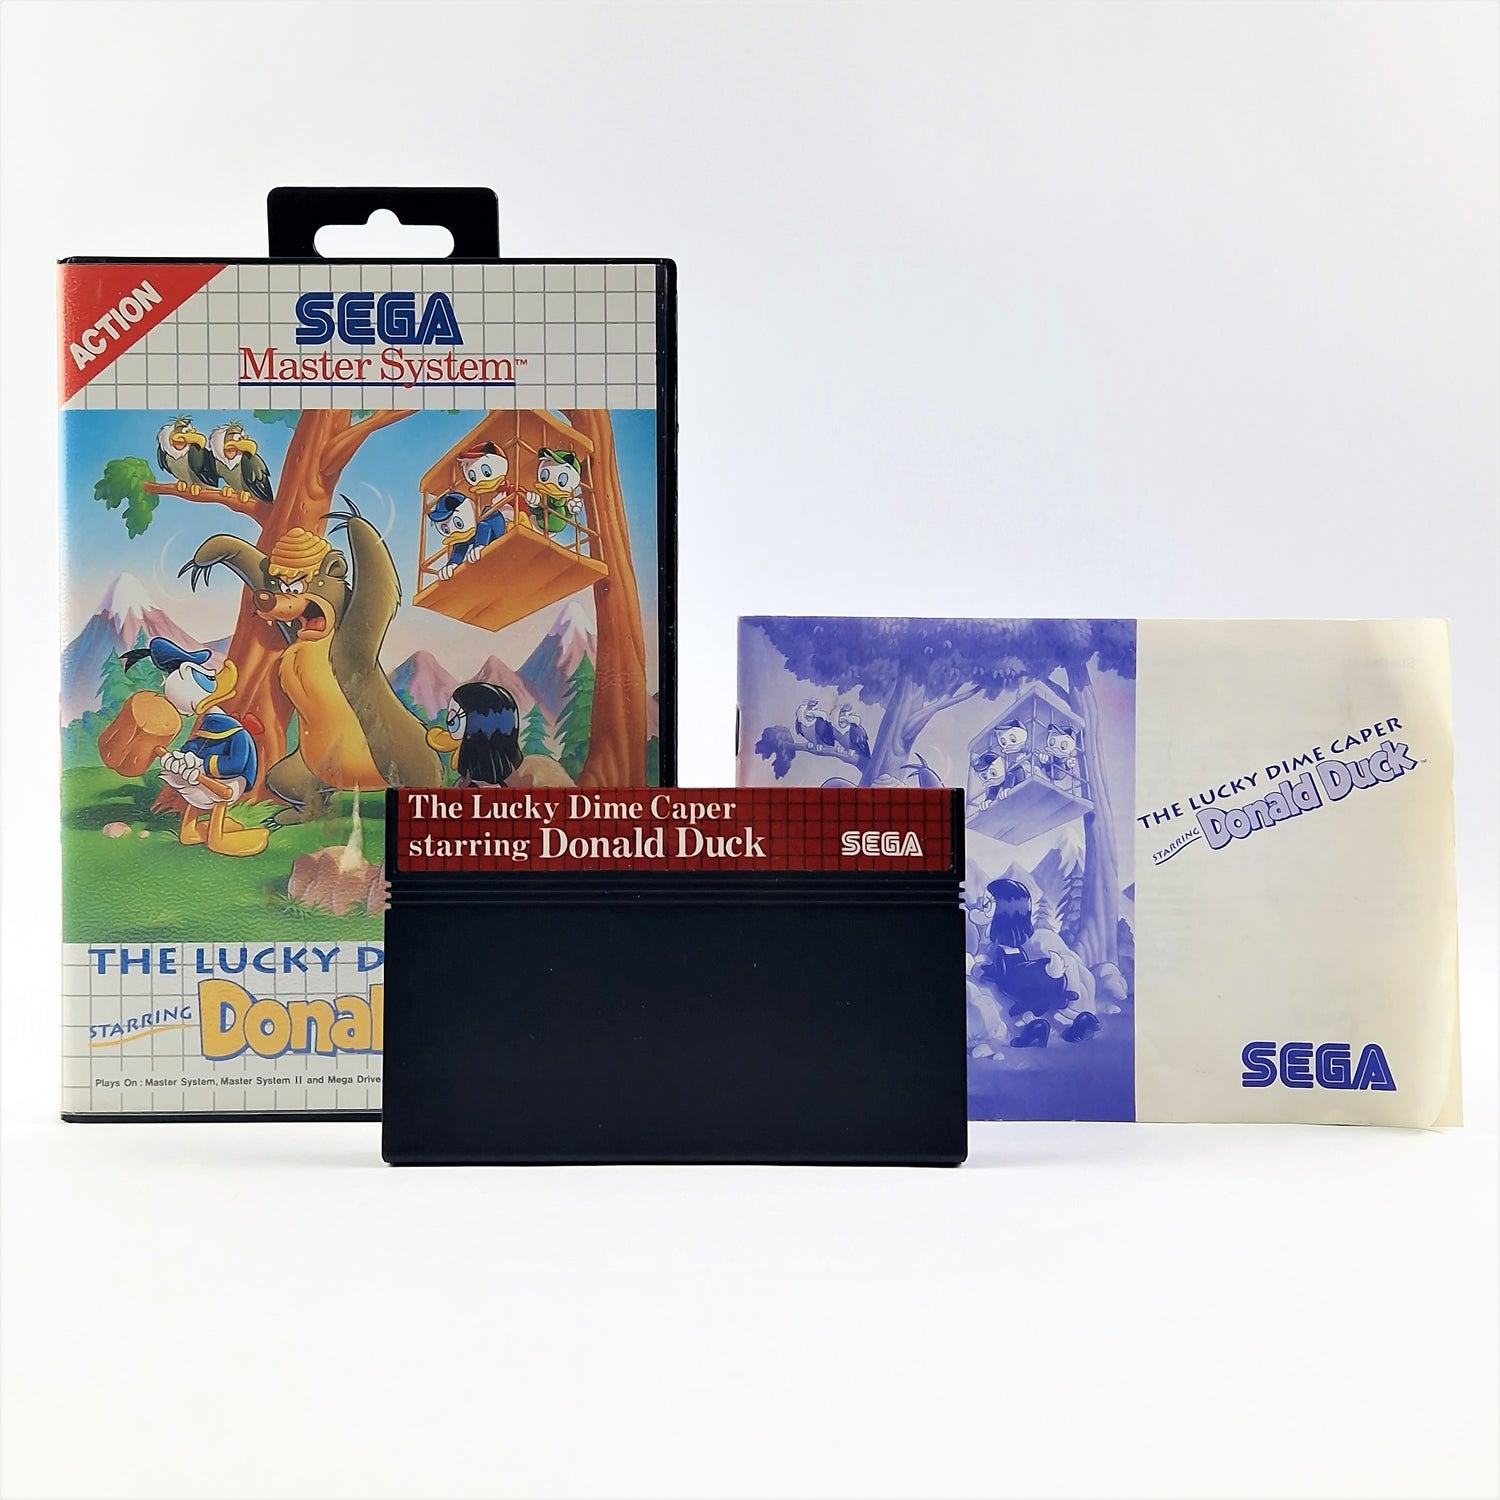 Sega Master System Game: The Lucky Dime Caper Donald Duck - OVP PAL - Good